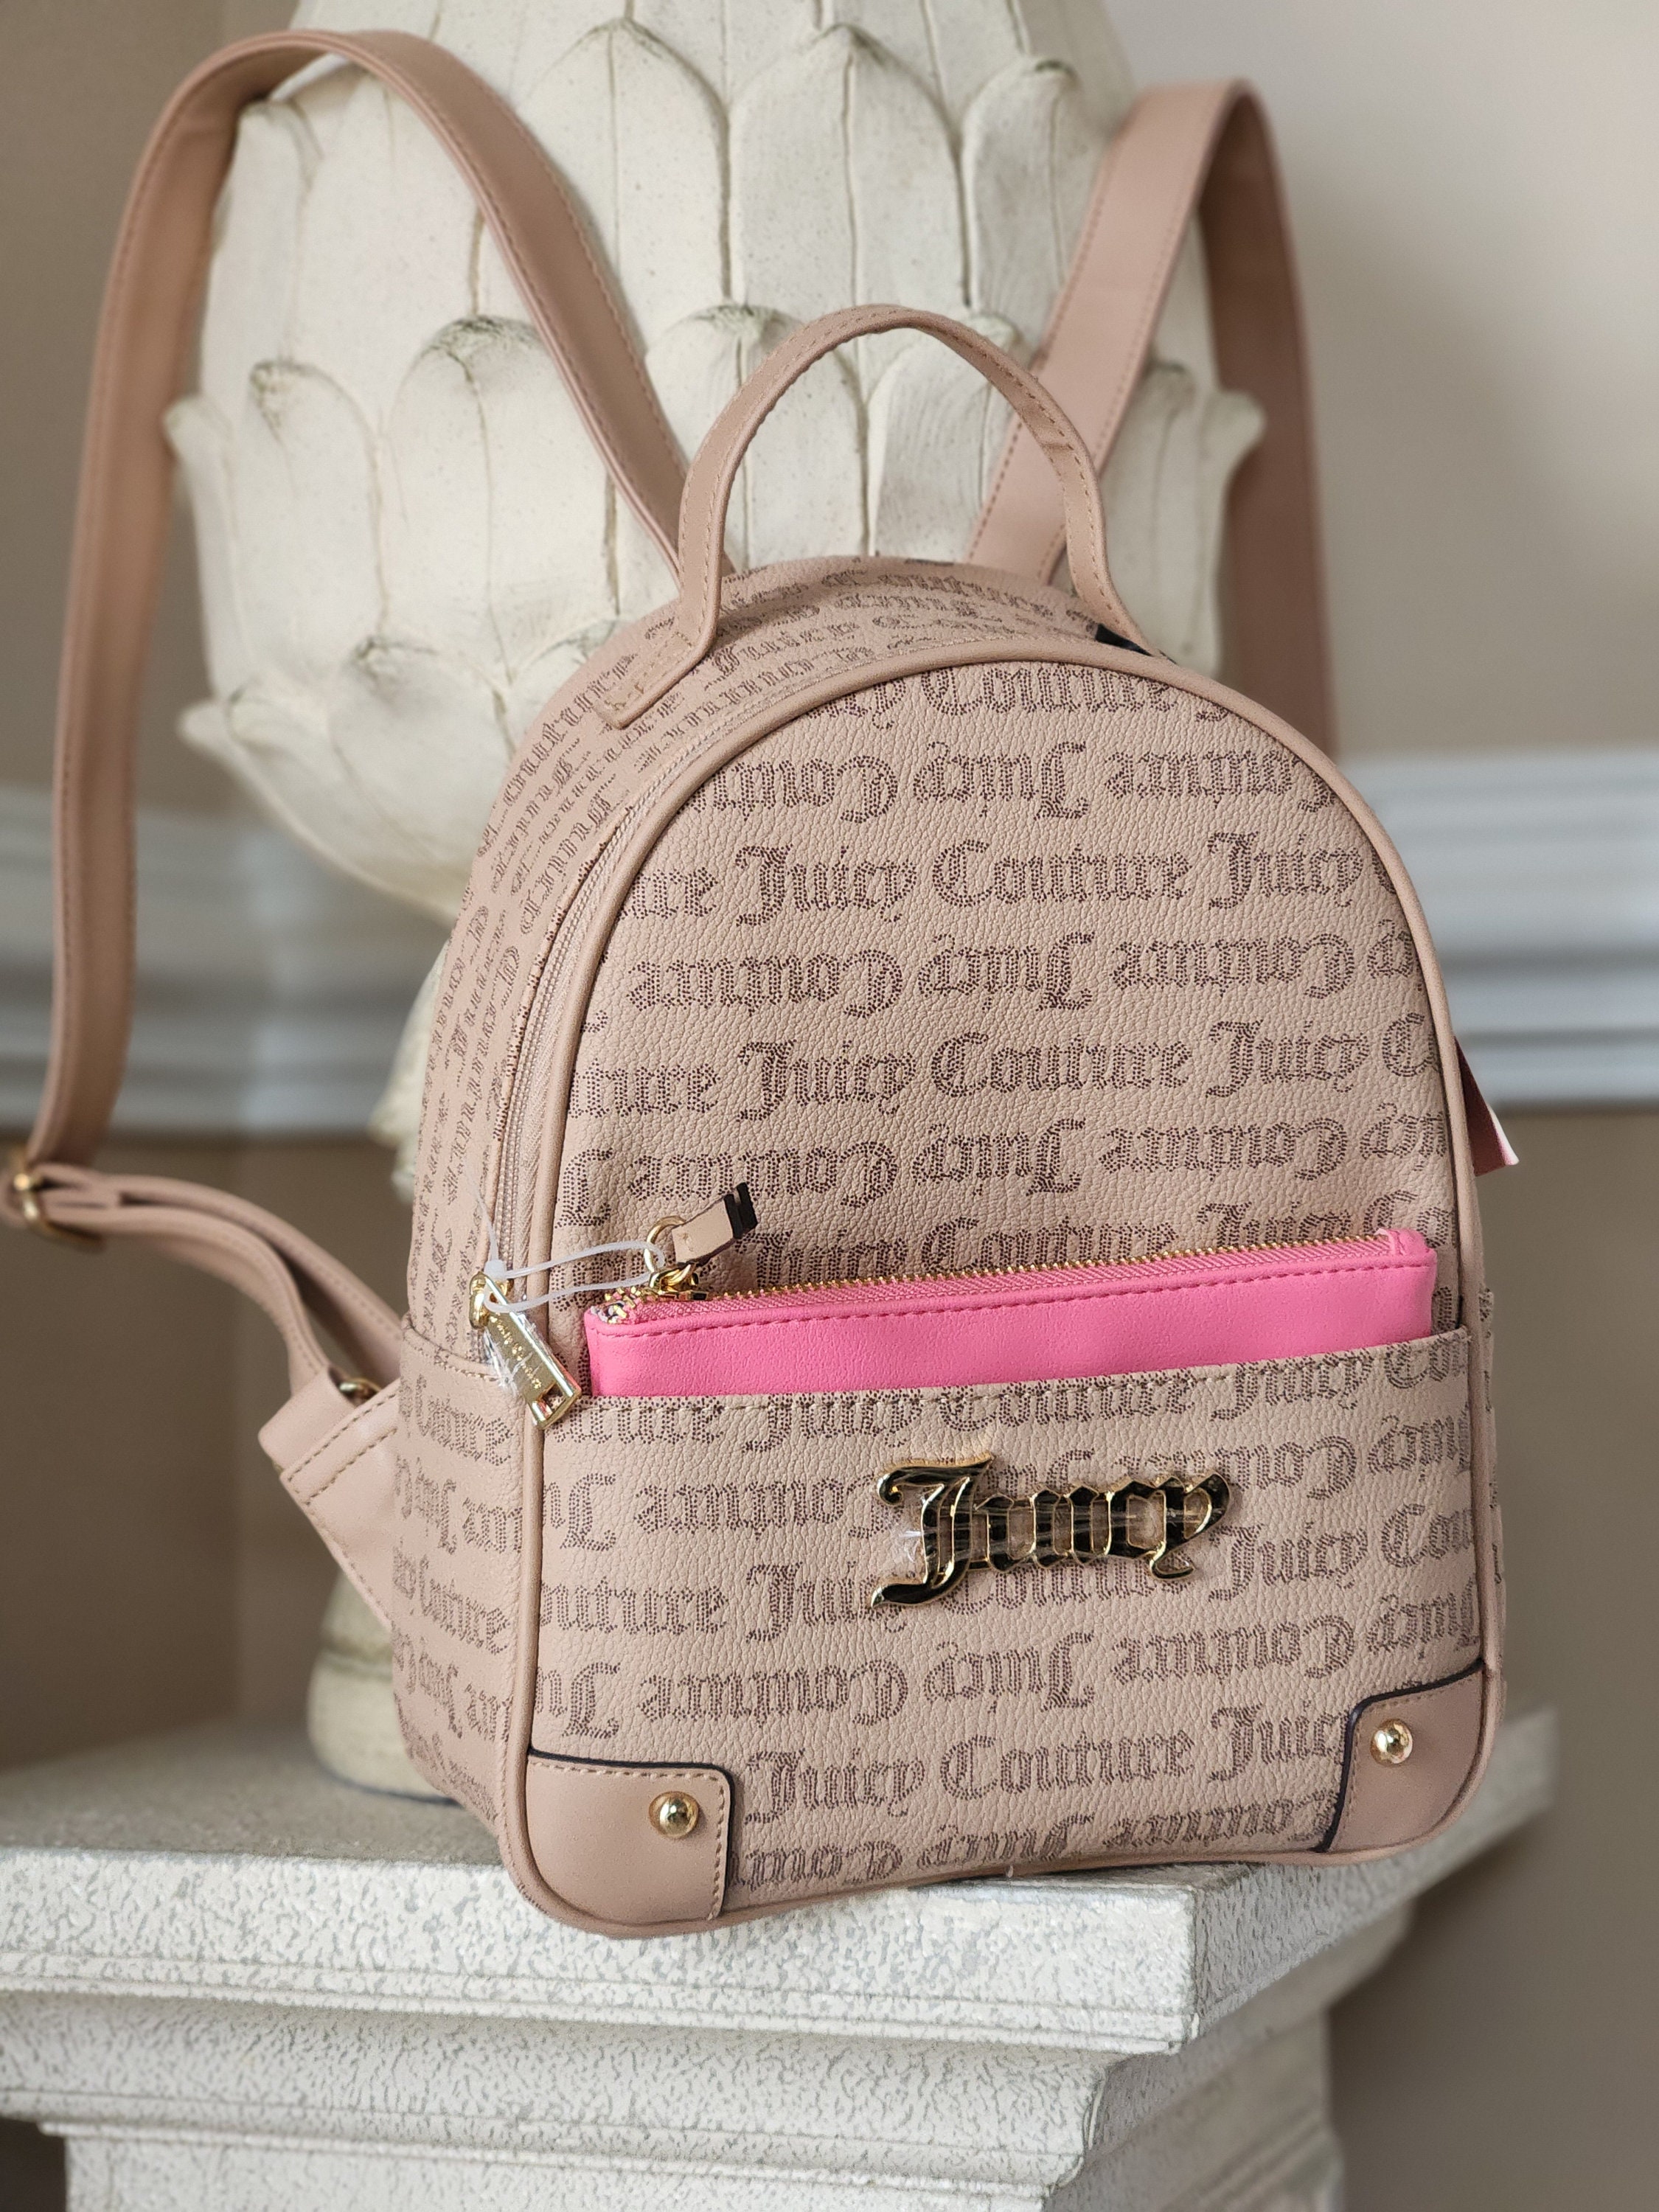 Juicy Couture, Bags, New Pink Juicy Couture Backpack